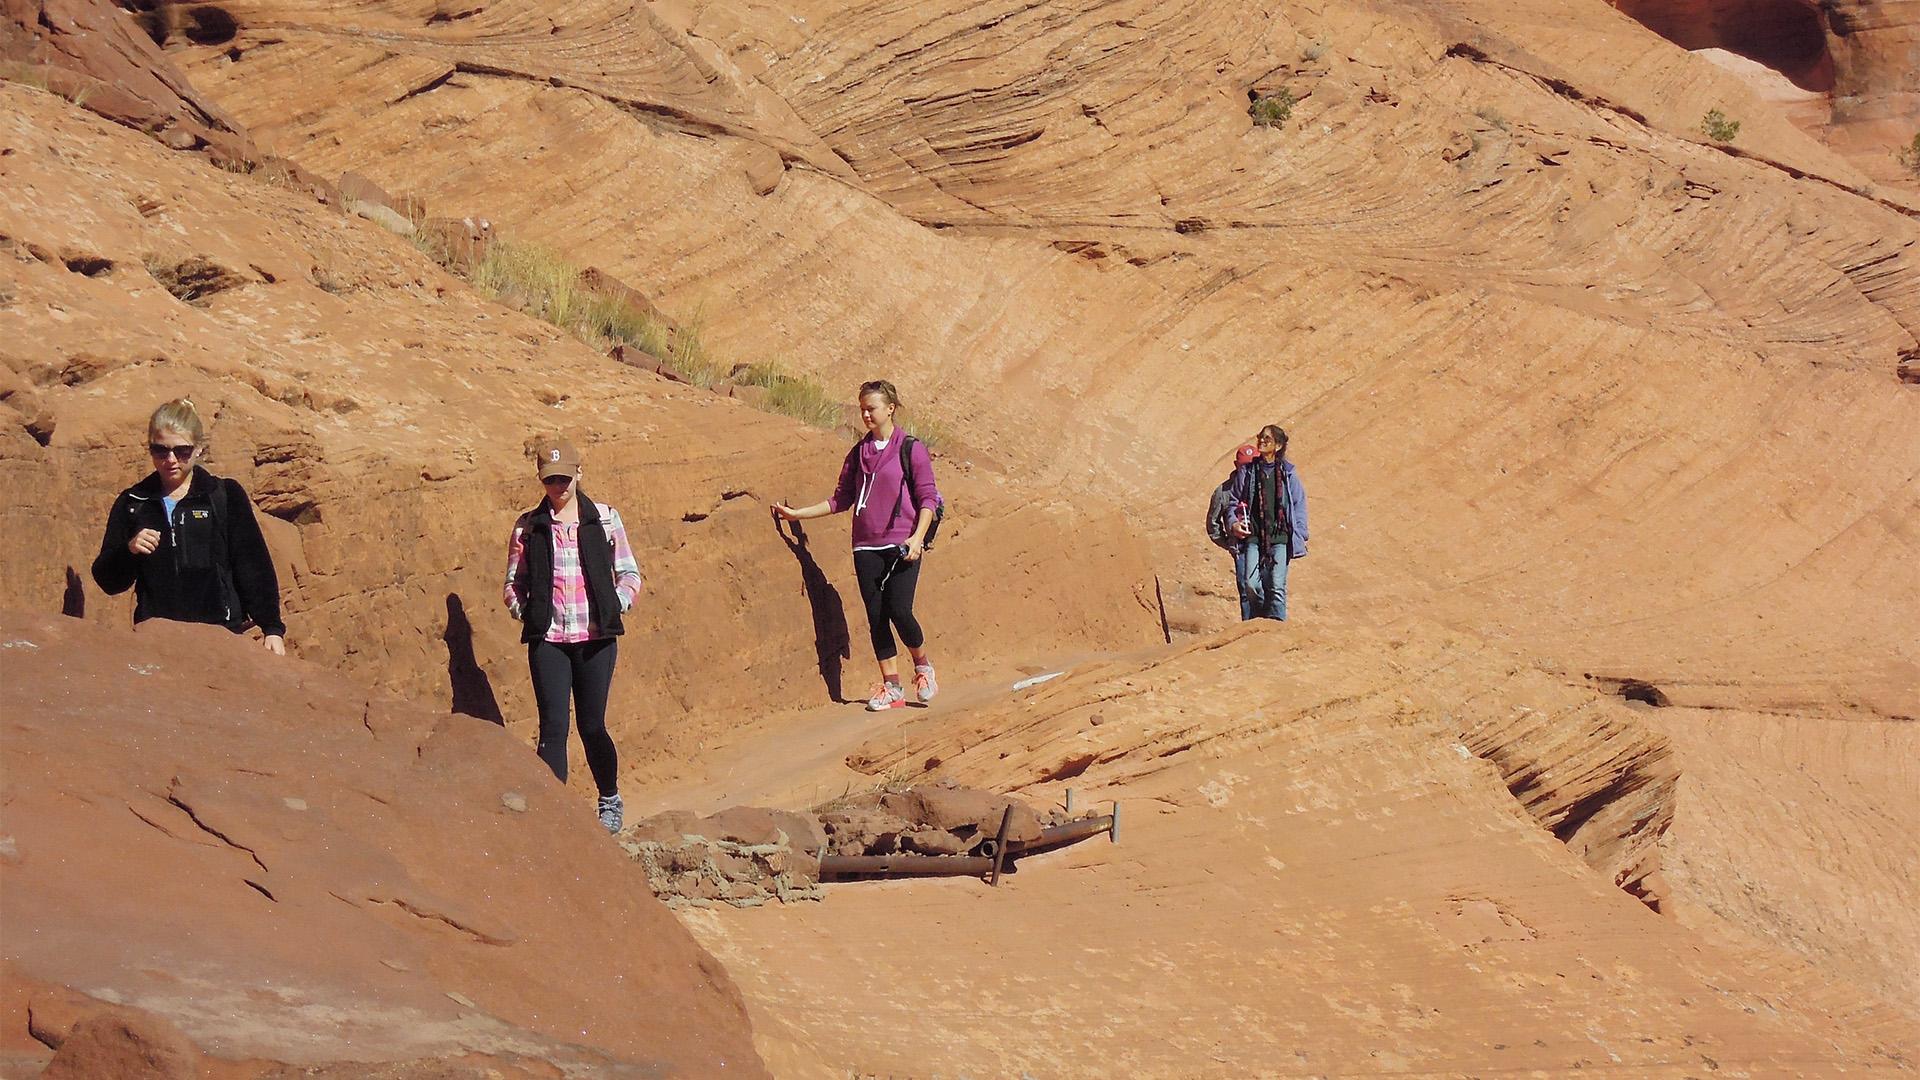 Students walk along a rock face in the western United States